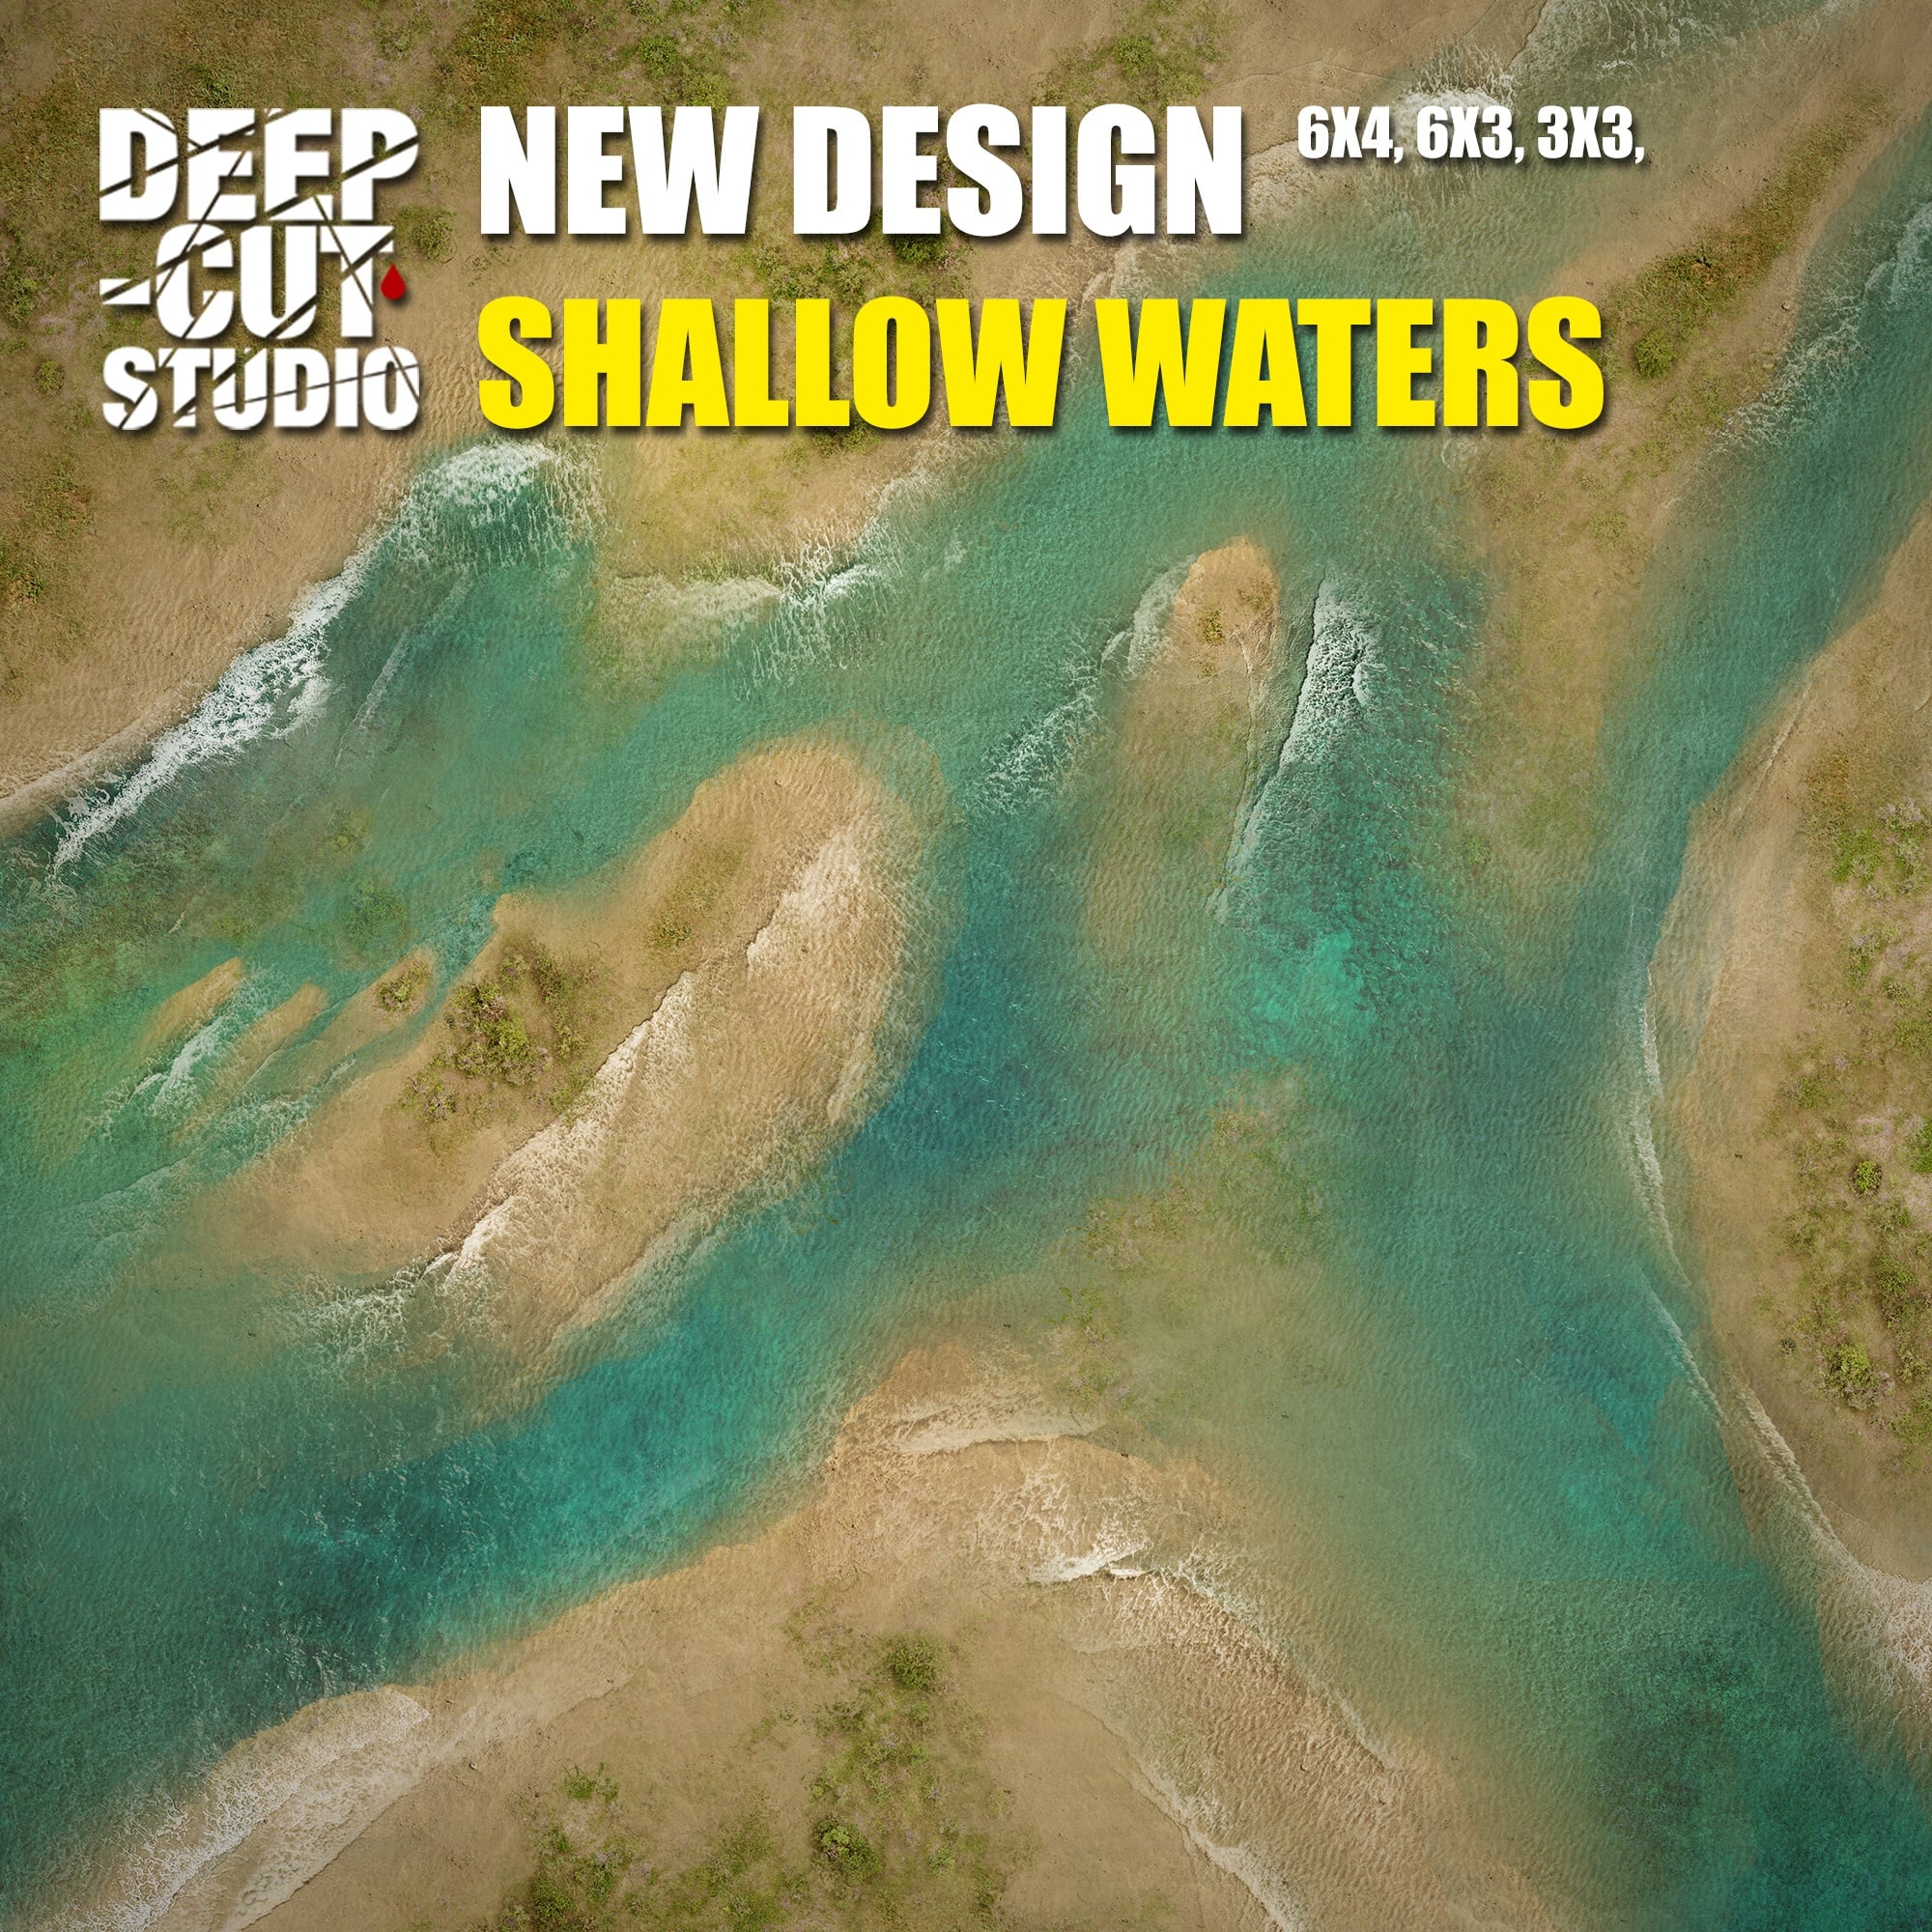 Shallow Waters Preview - Deep-Cut Studio